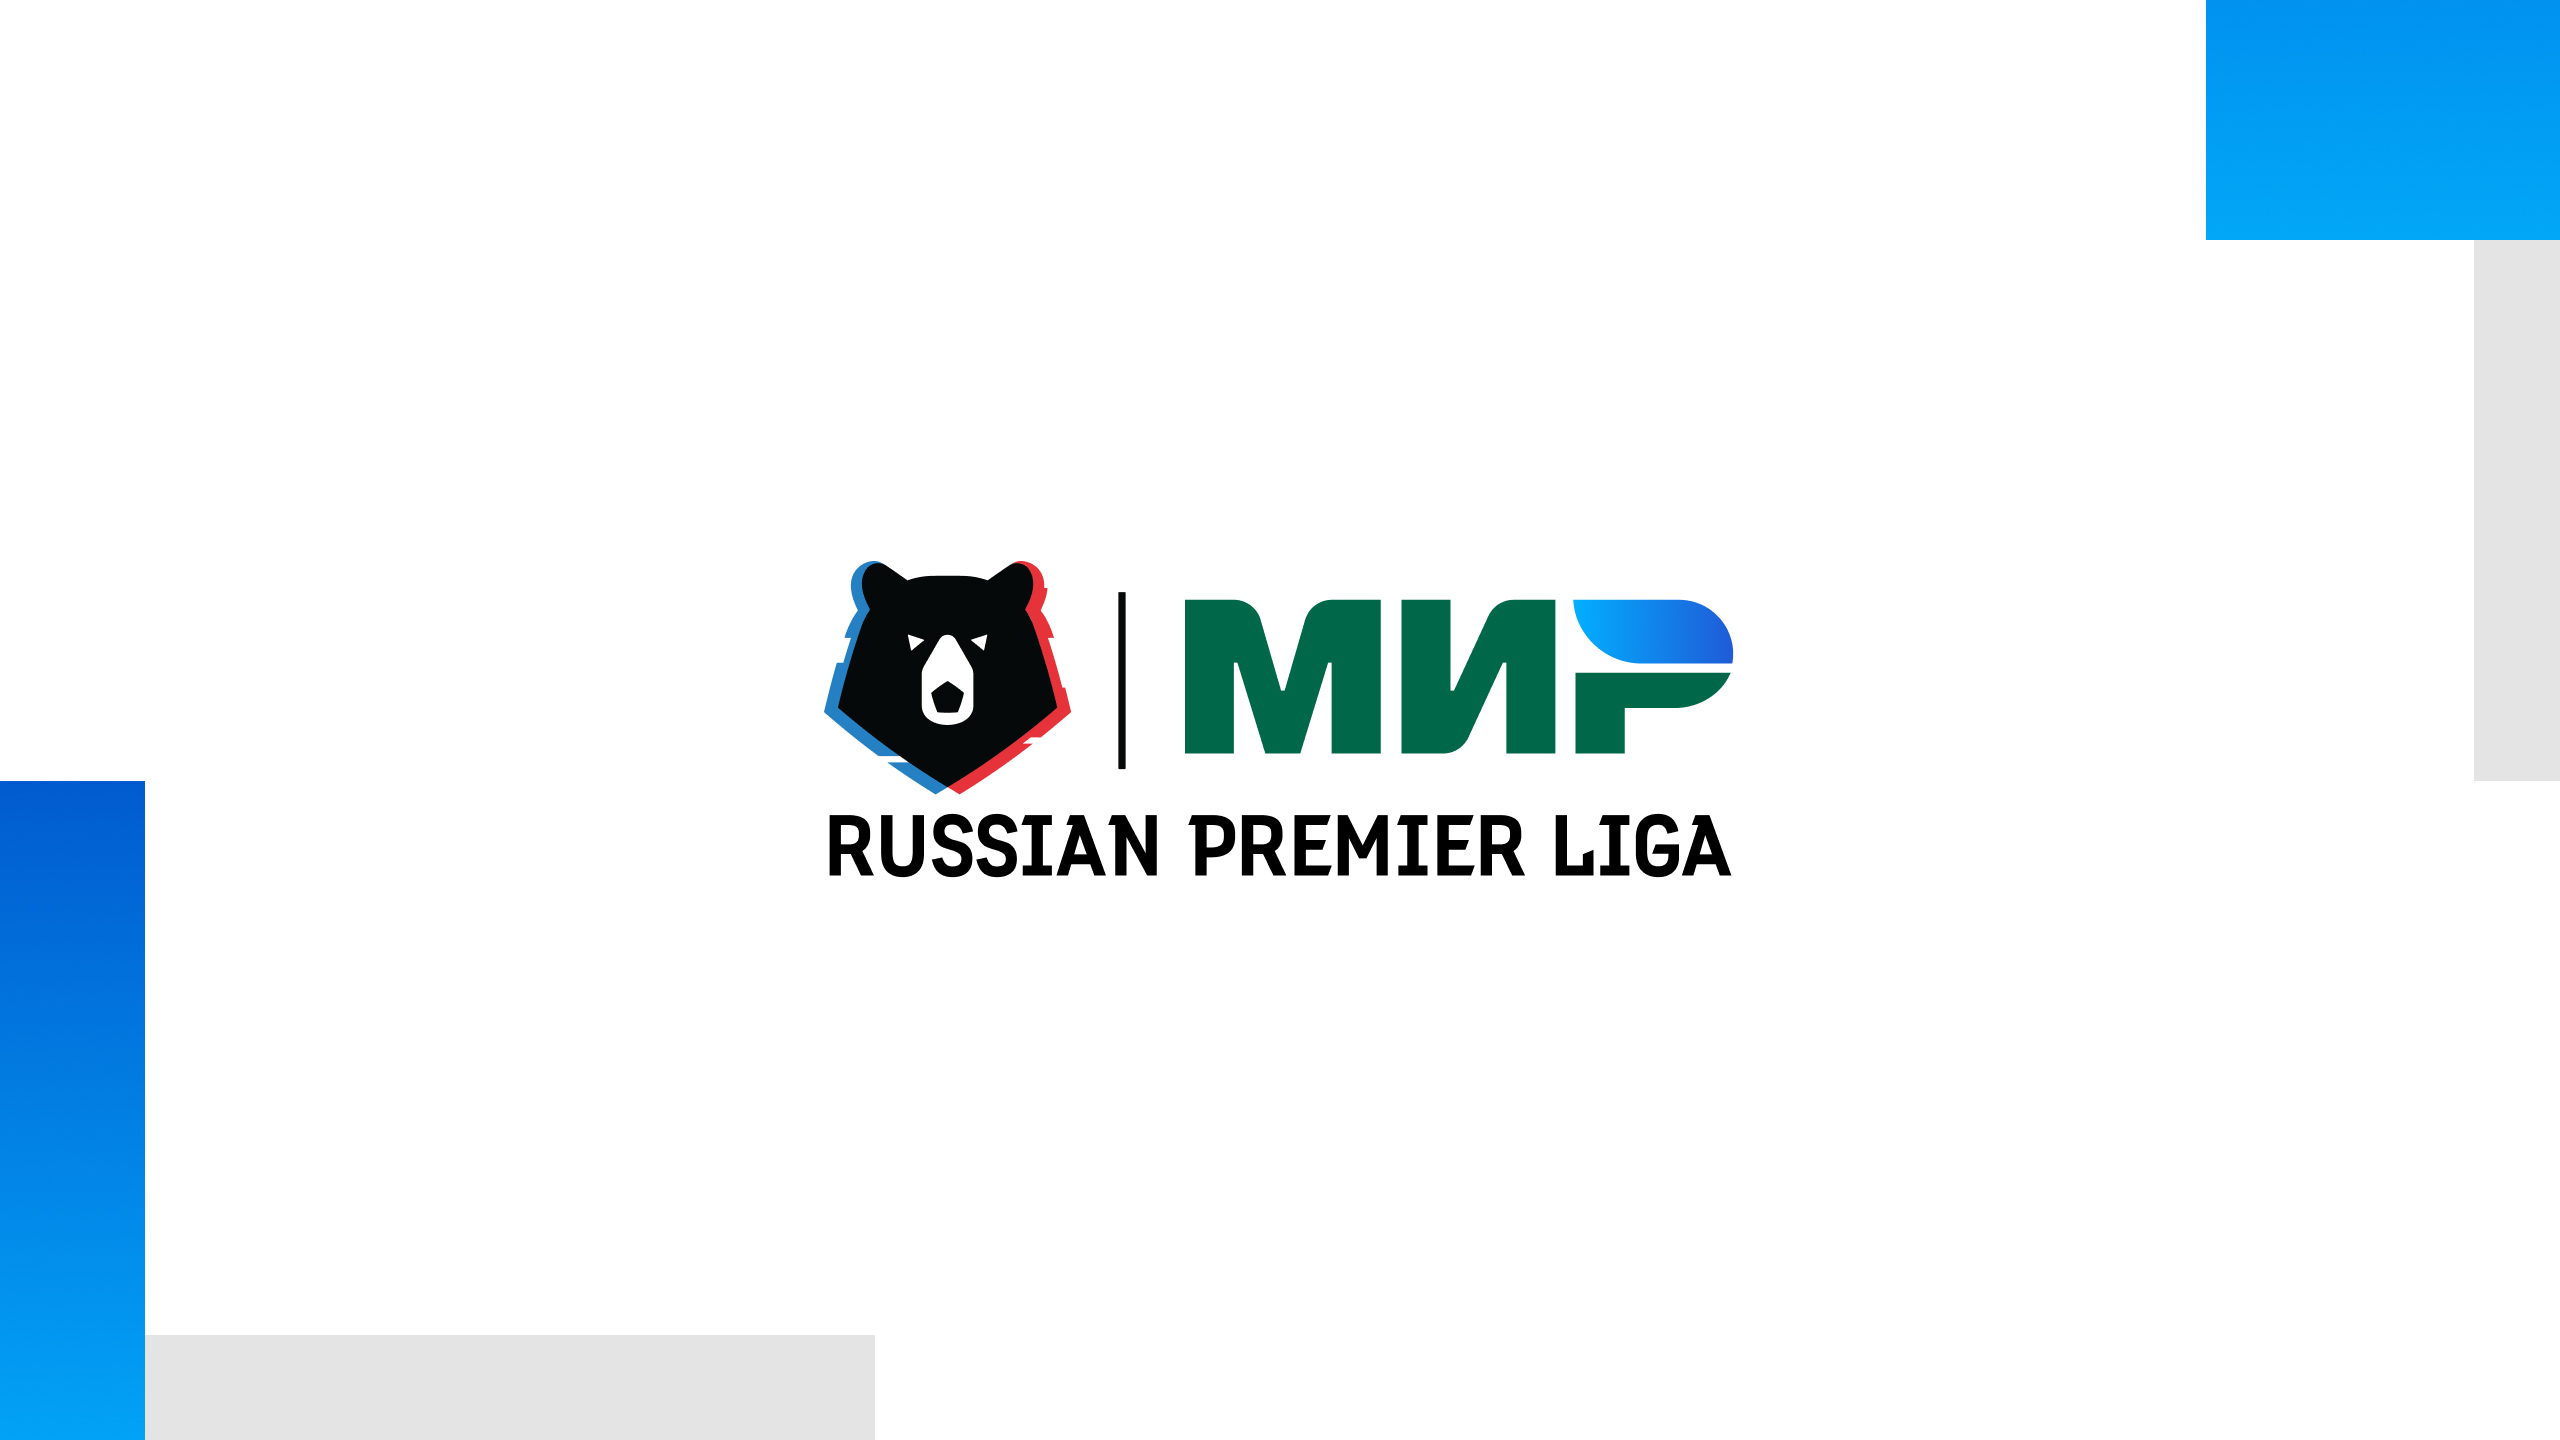 Russian Cup MD 1 in RPL Path: 2-0 wins in six matches, Aleksandrov, Cassierra & Golenkov hit the braces